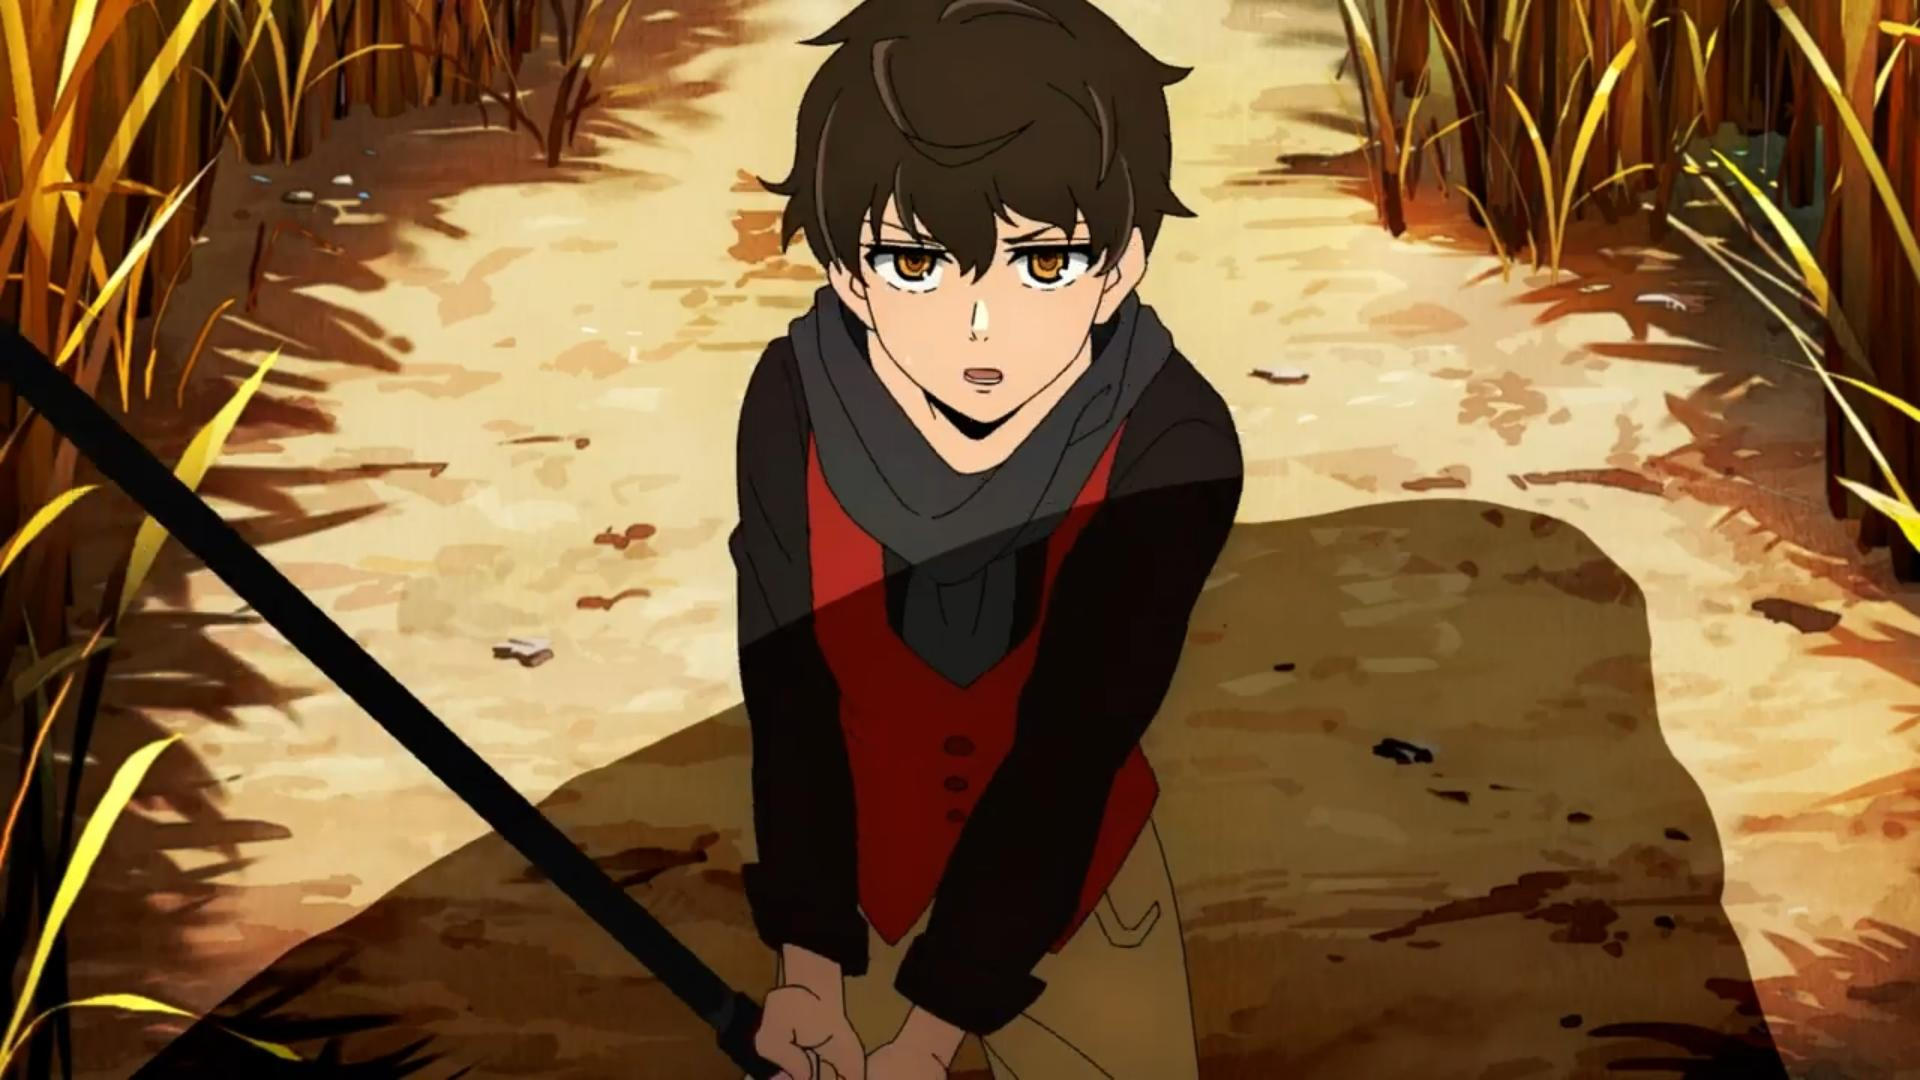 Tower Of God: Great Journey Releases This Winter In North America, Europe -  GameSpot